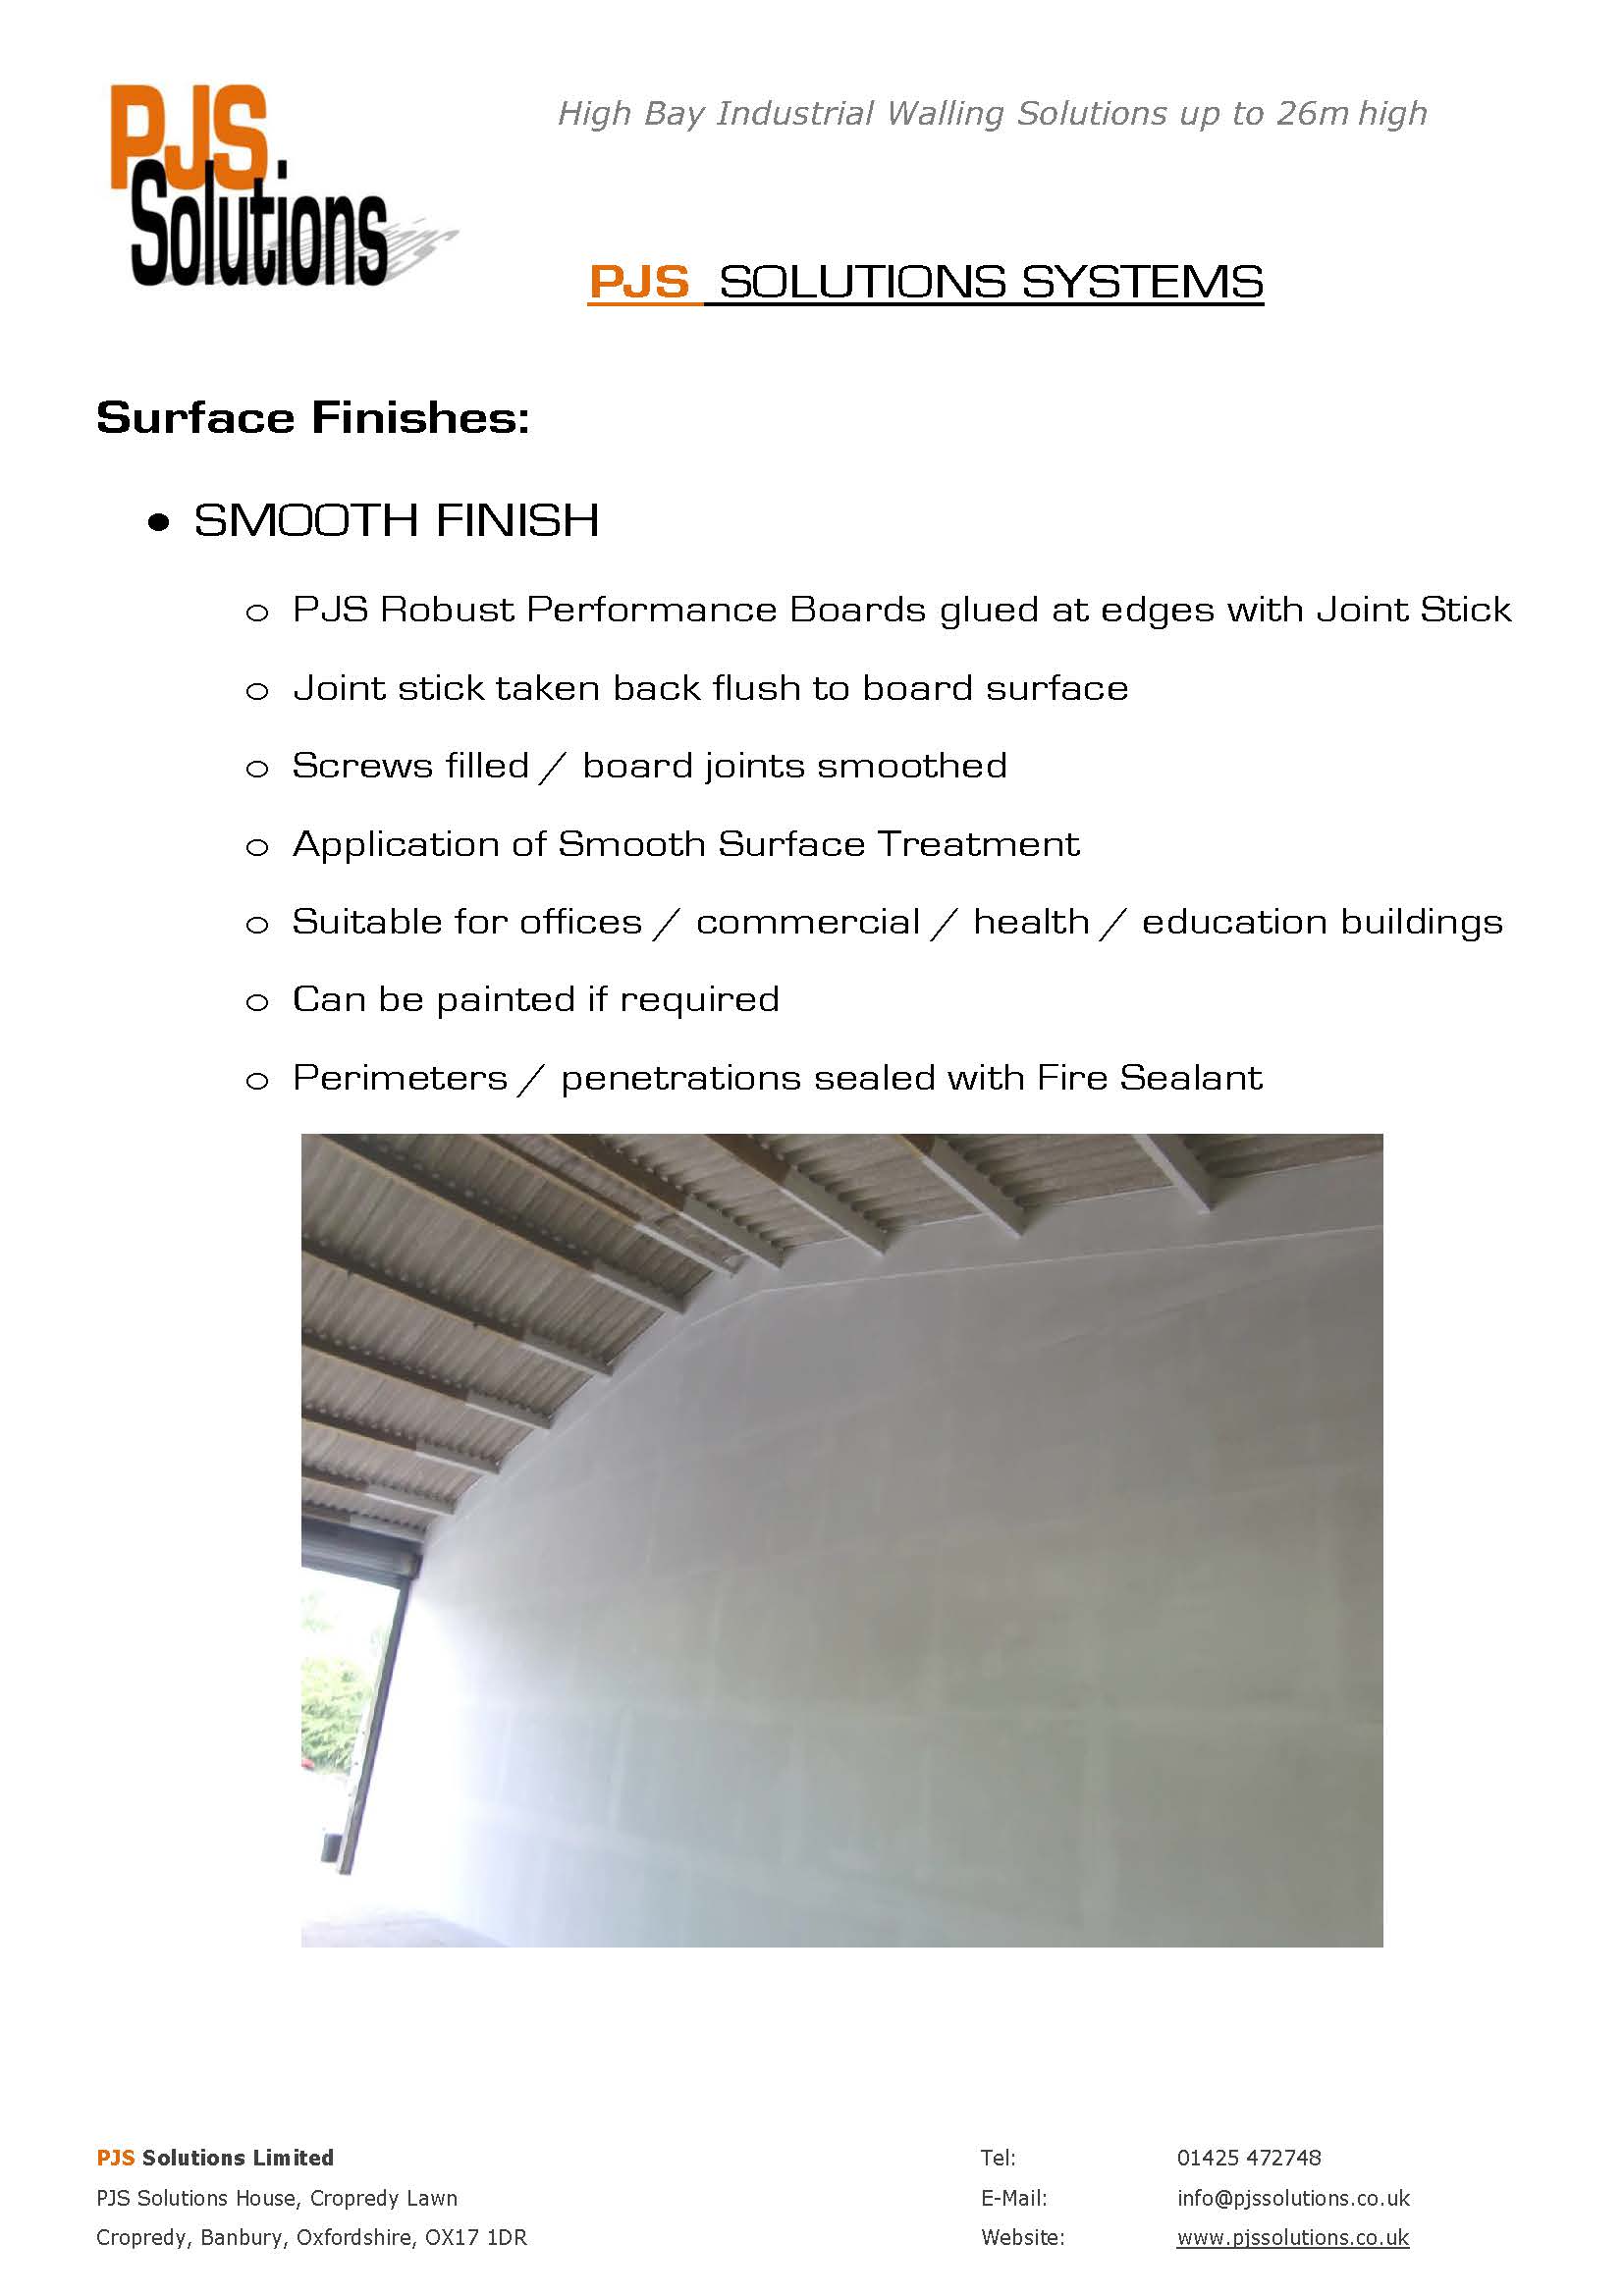 PJS SOLUTIONS PARTITION SYSTEMS Surface Finishes - SMOOTH FINISH